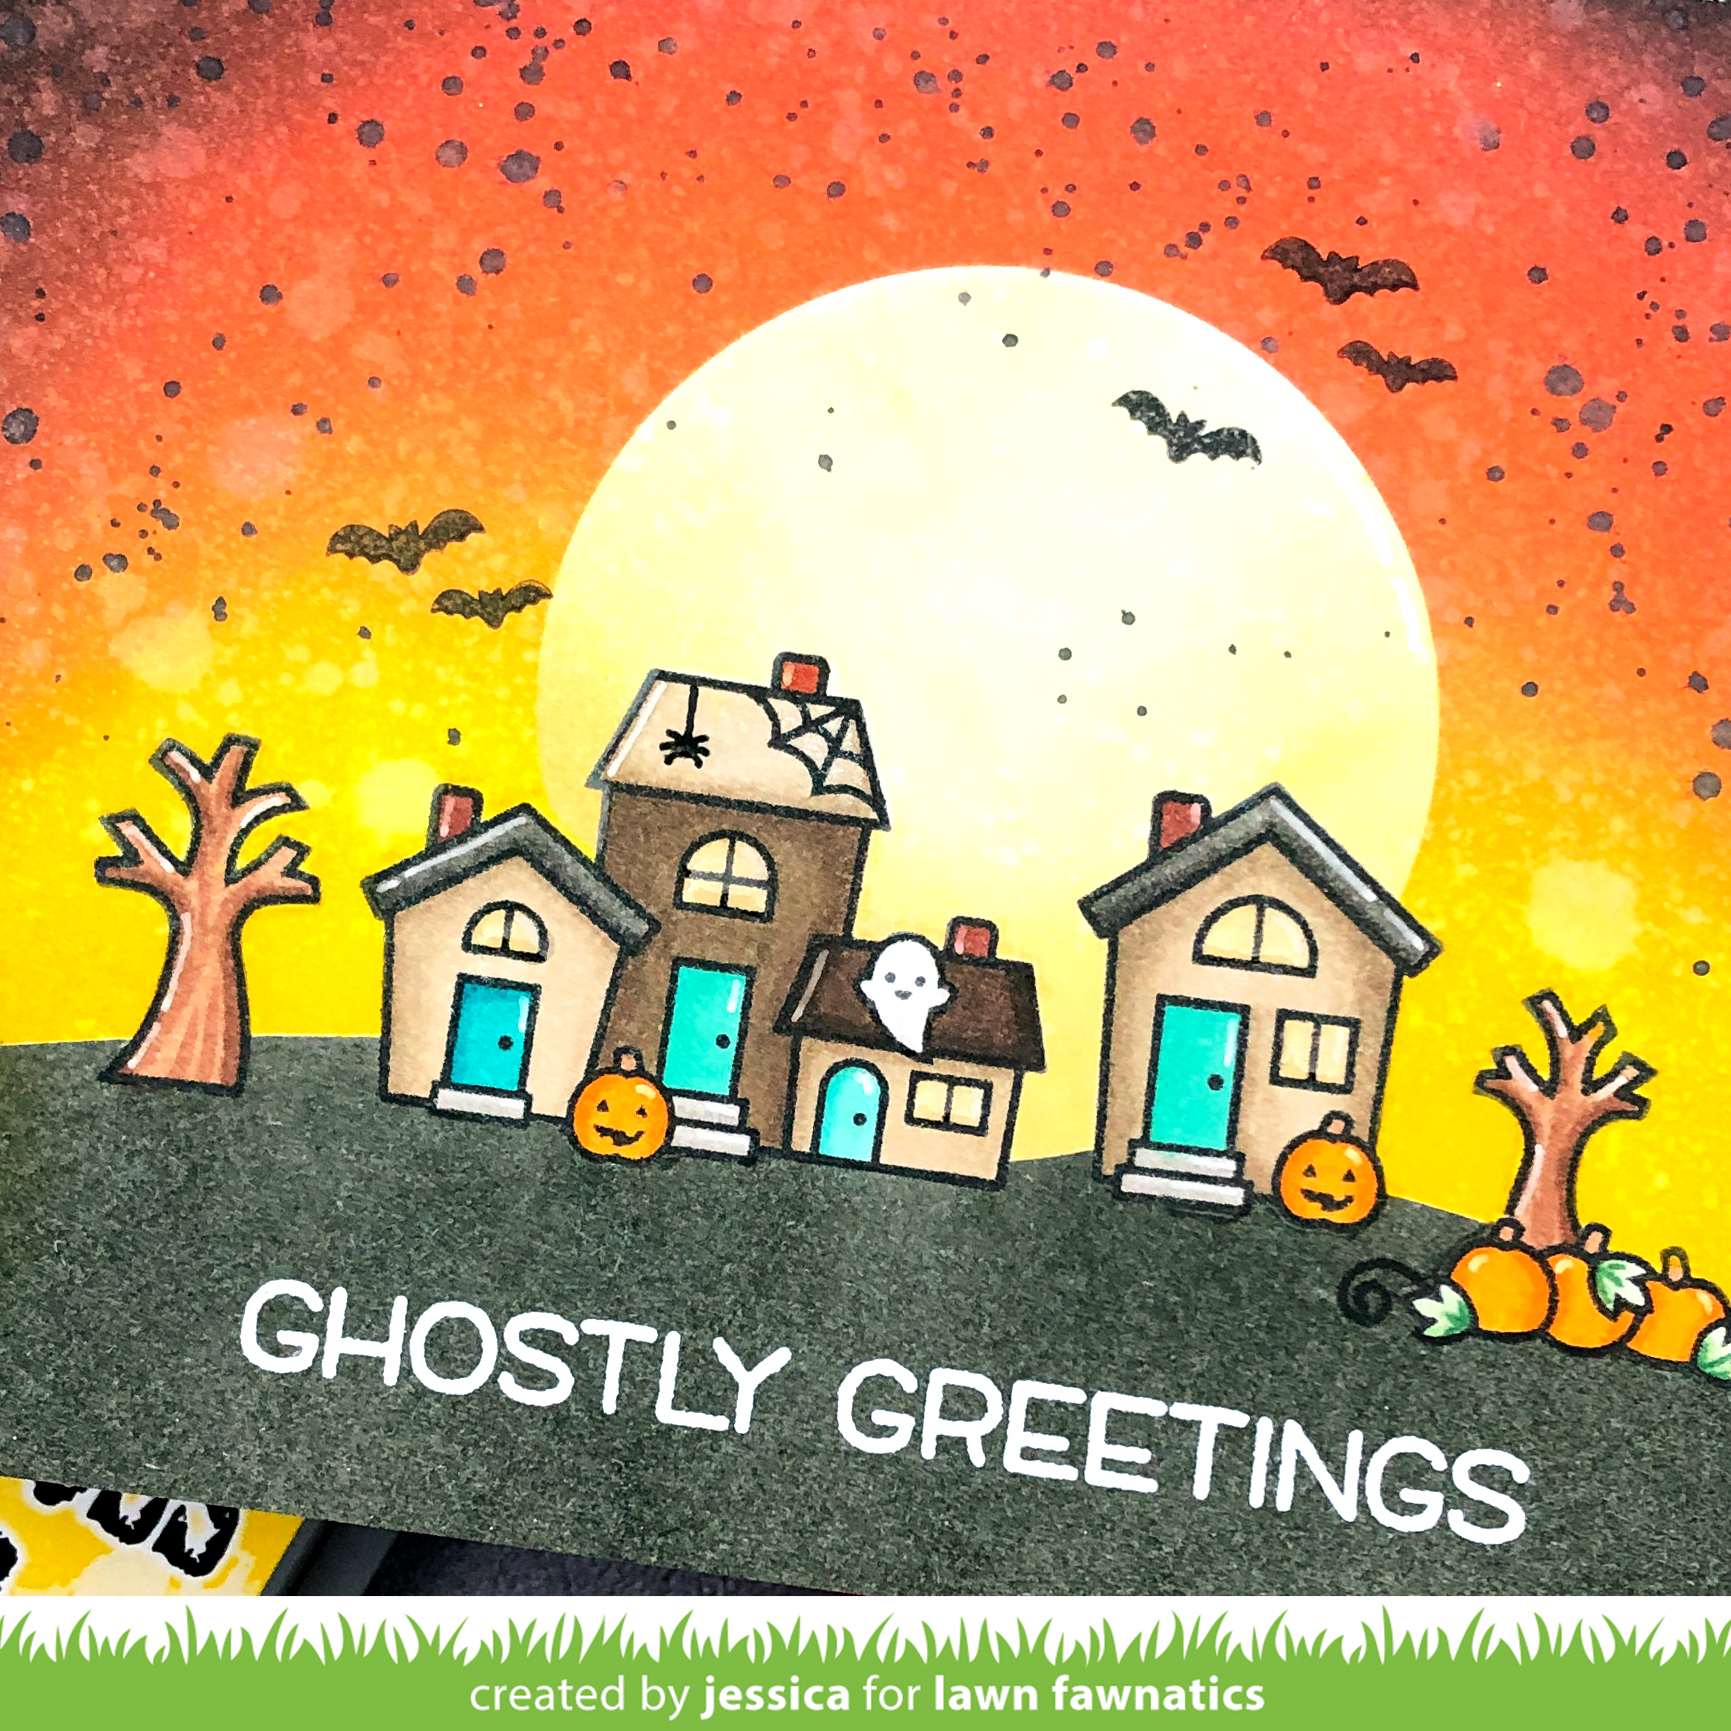 Ghostly Greetings by Jessica Frost-Ballas for Lawn Fawnatics